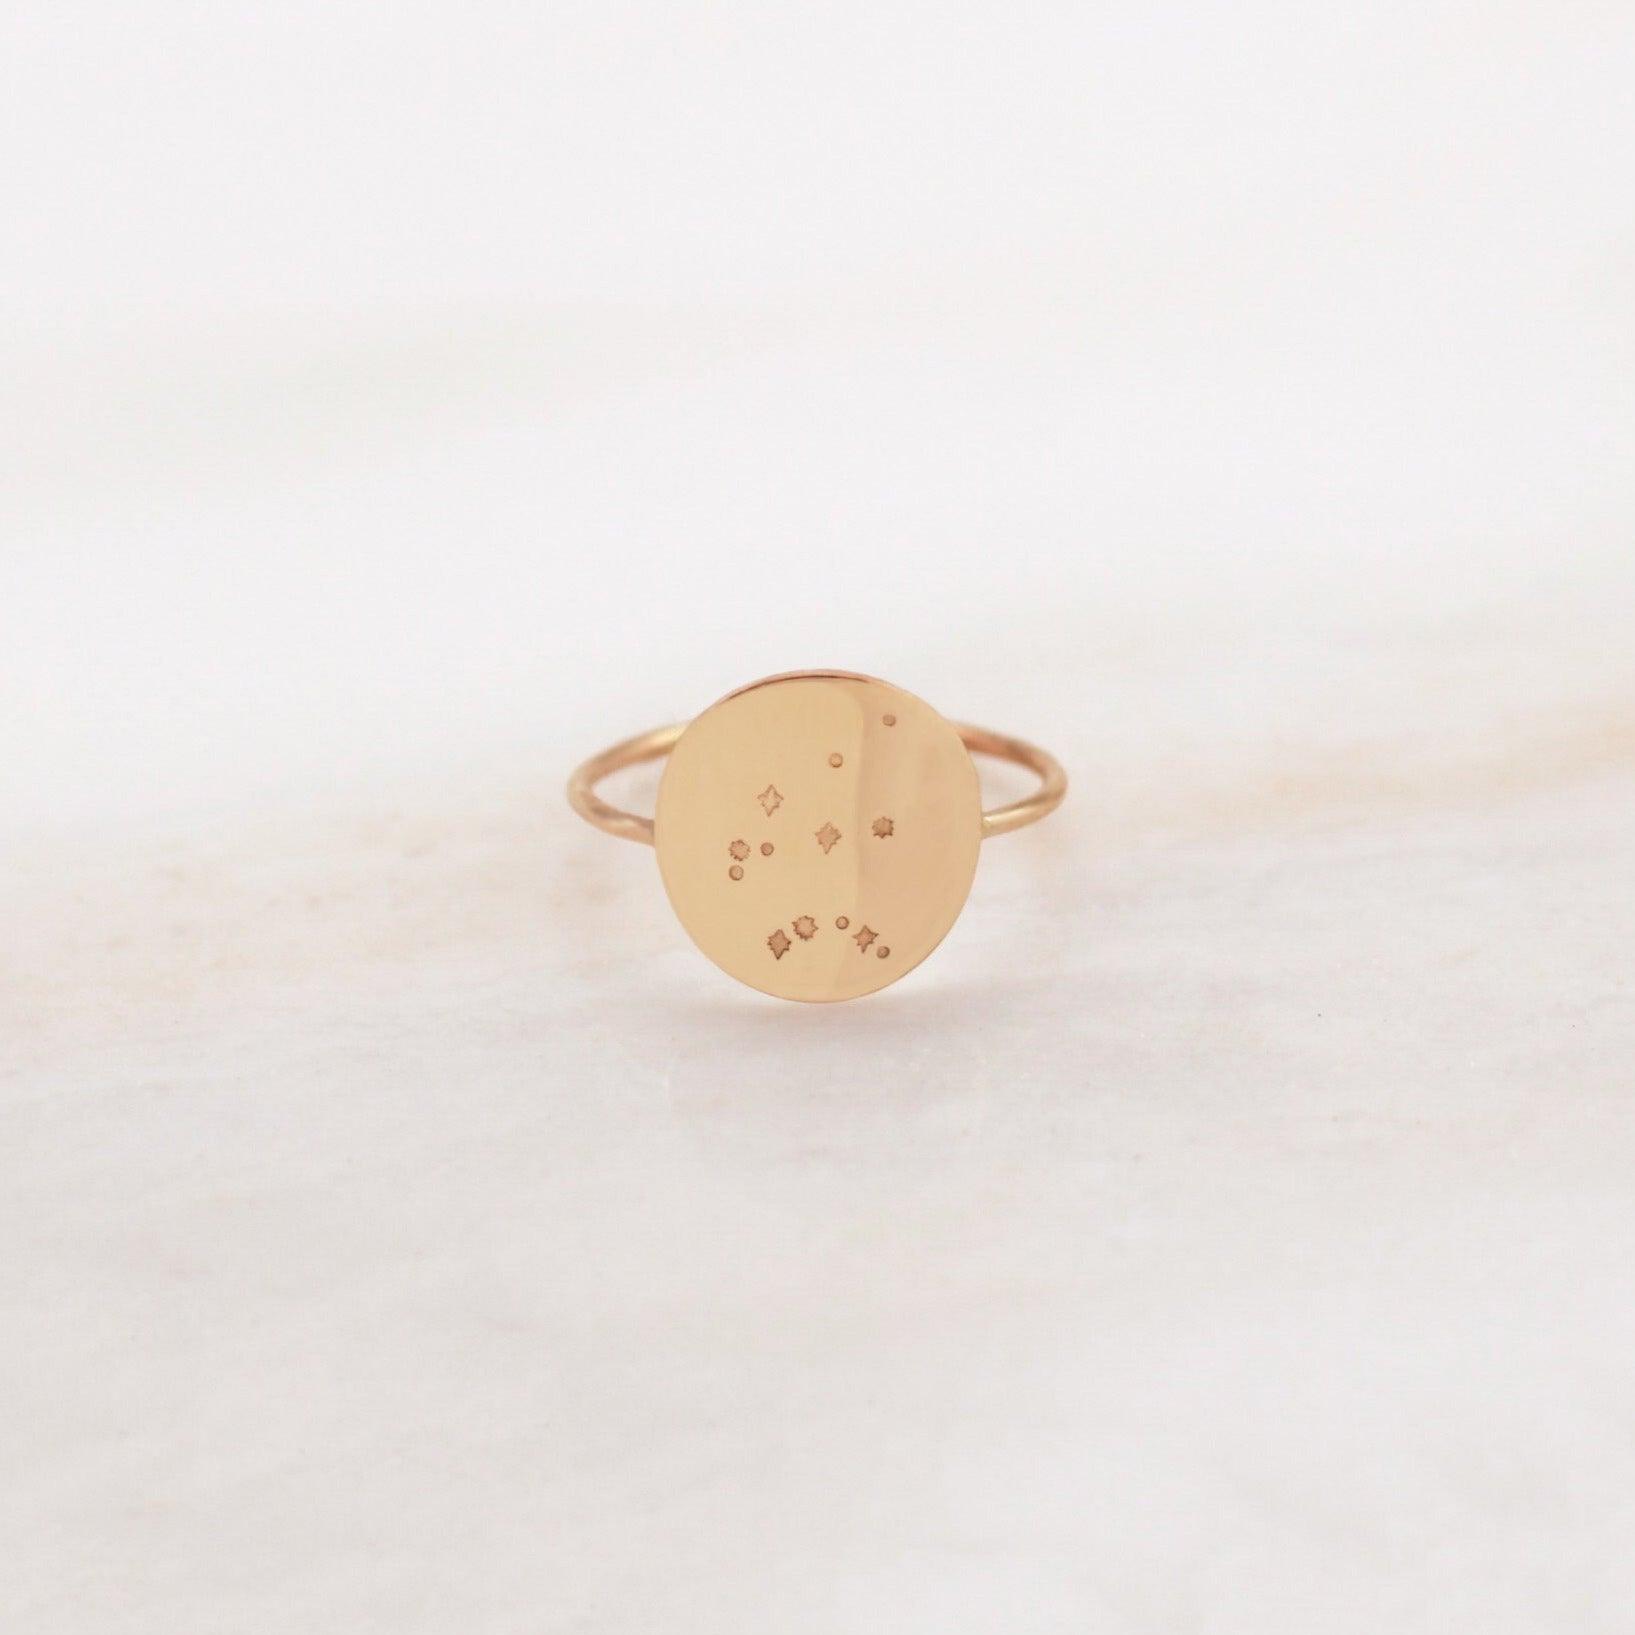 Gaia Zodiac Constellation Ring - Nolia Jewelry - Meaningful + Sustainably Handcrafted Jewelry